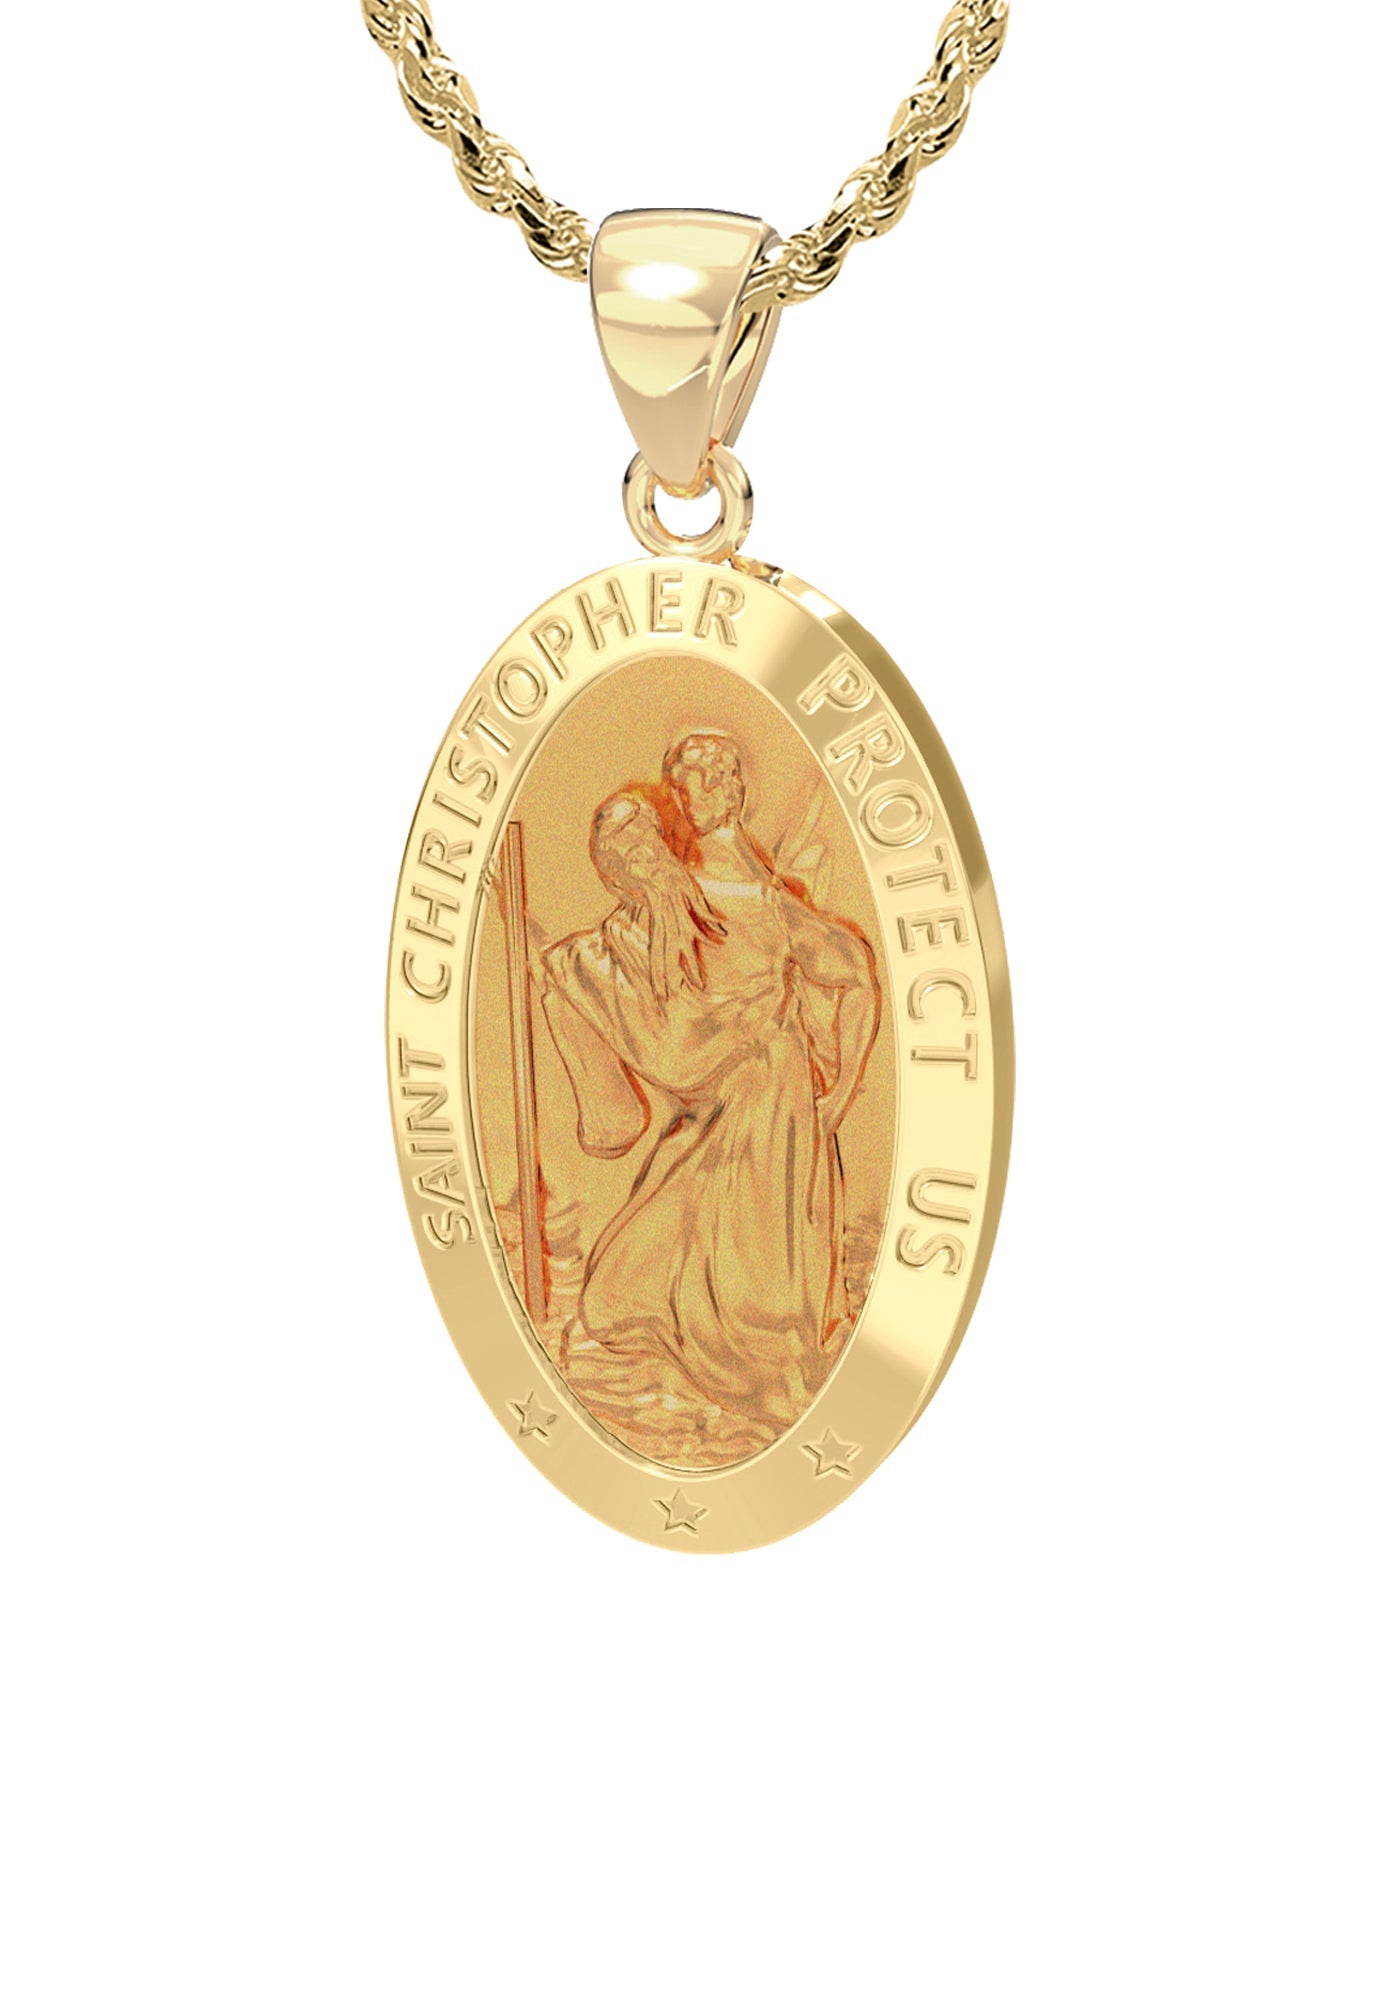 Ladies 14K Yellow Gold Saint Christopher Polished Finish Hollow Pendant Necklace, 22mm - US Jewels